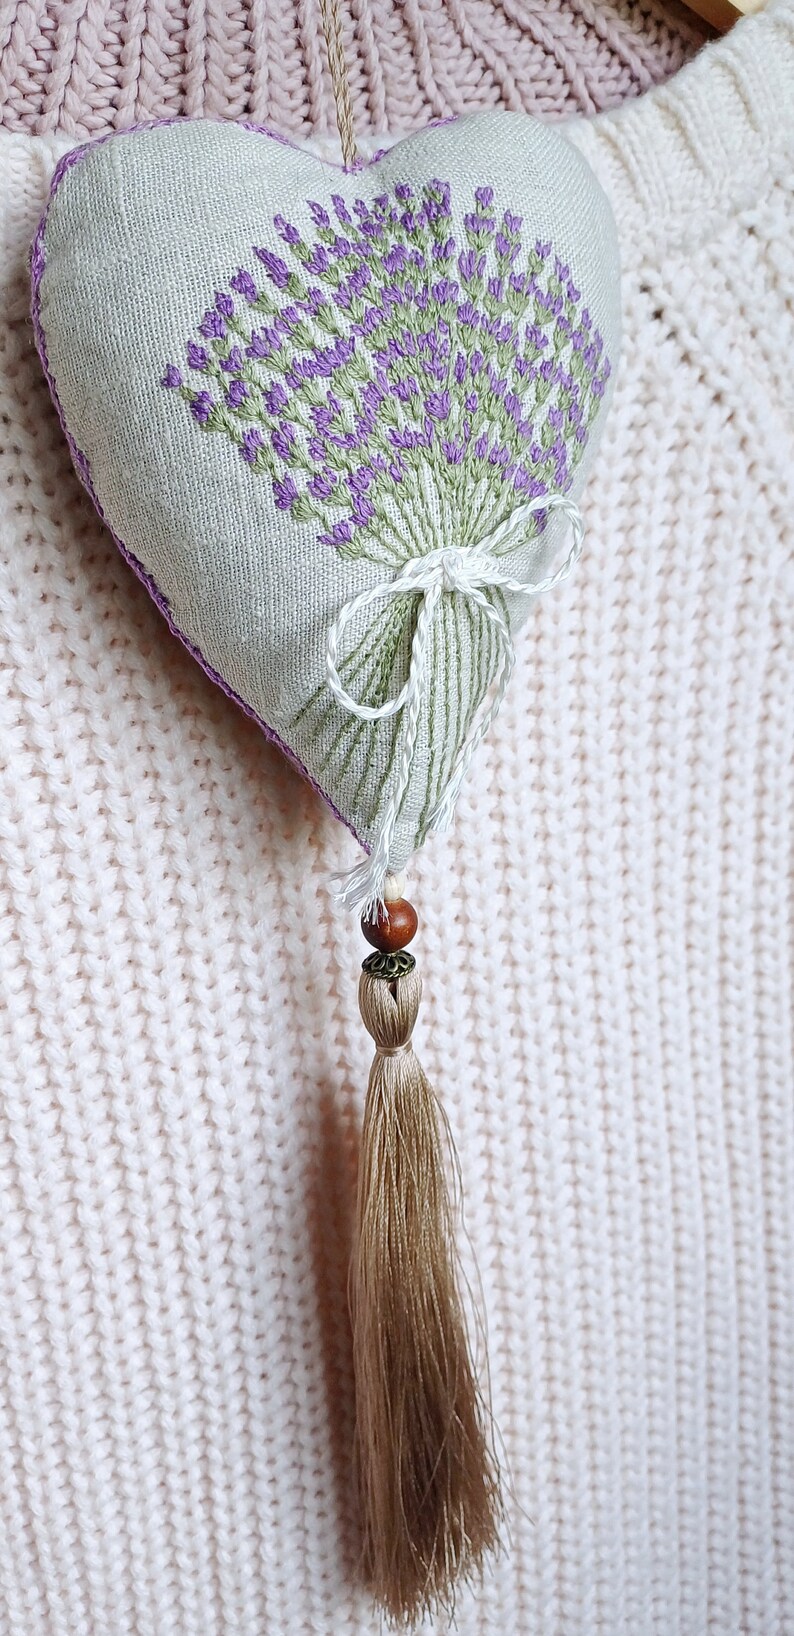 Handmade hand embroidered heart shaped linen sachet with hanging loop and tassel filled with lavender. Hung on cloth hanger. Embroidered lavenders.